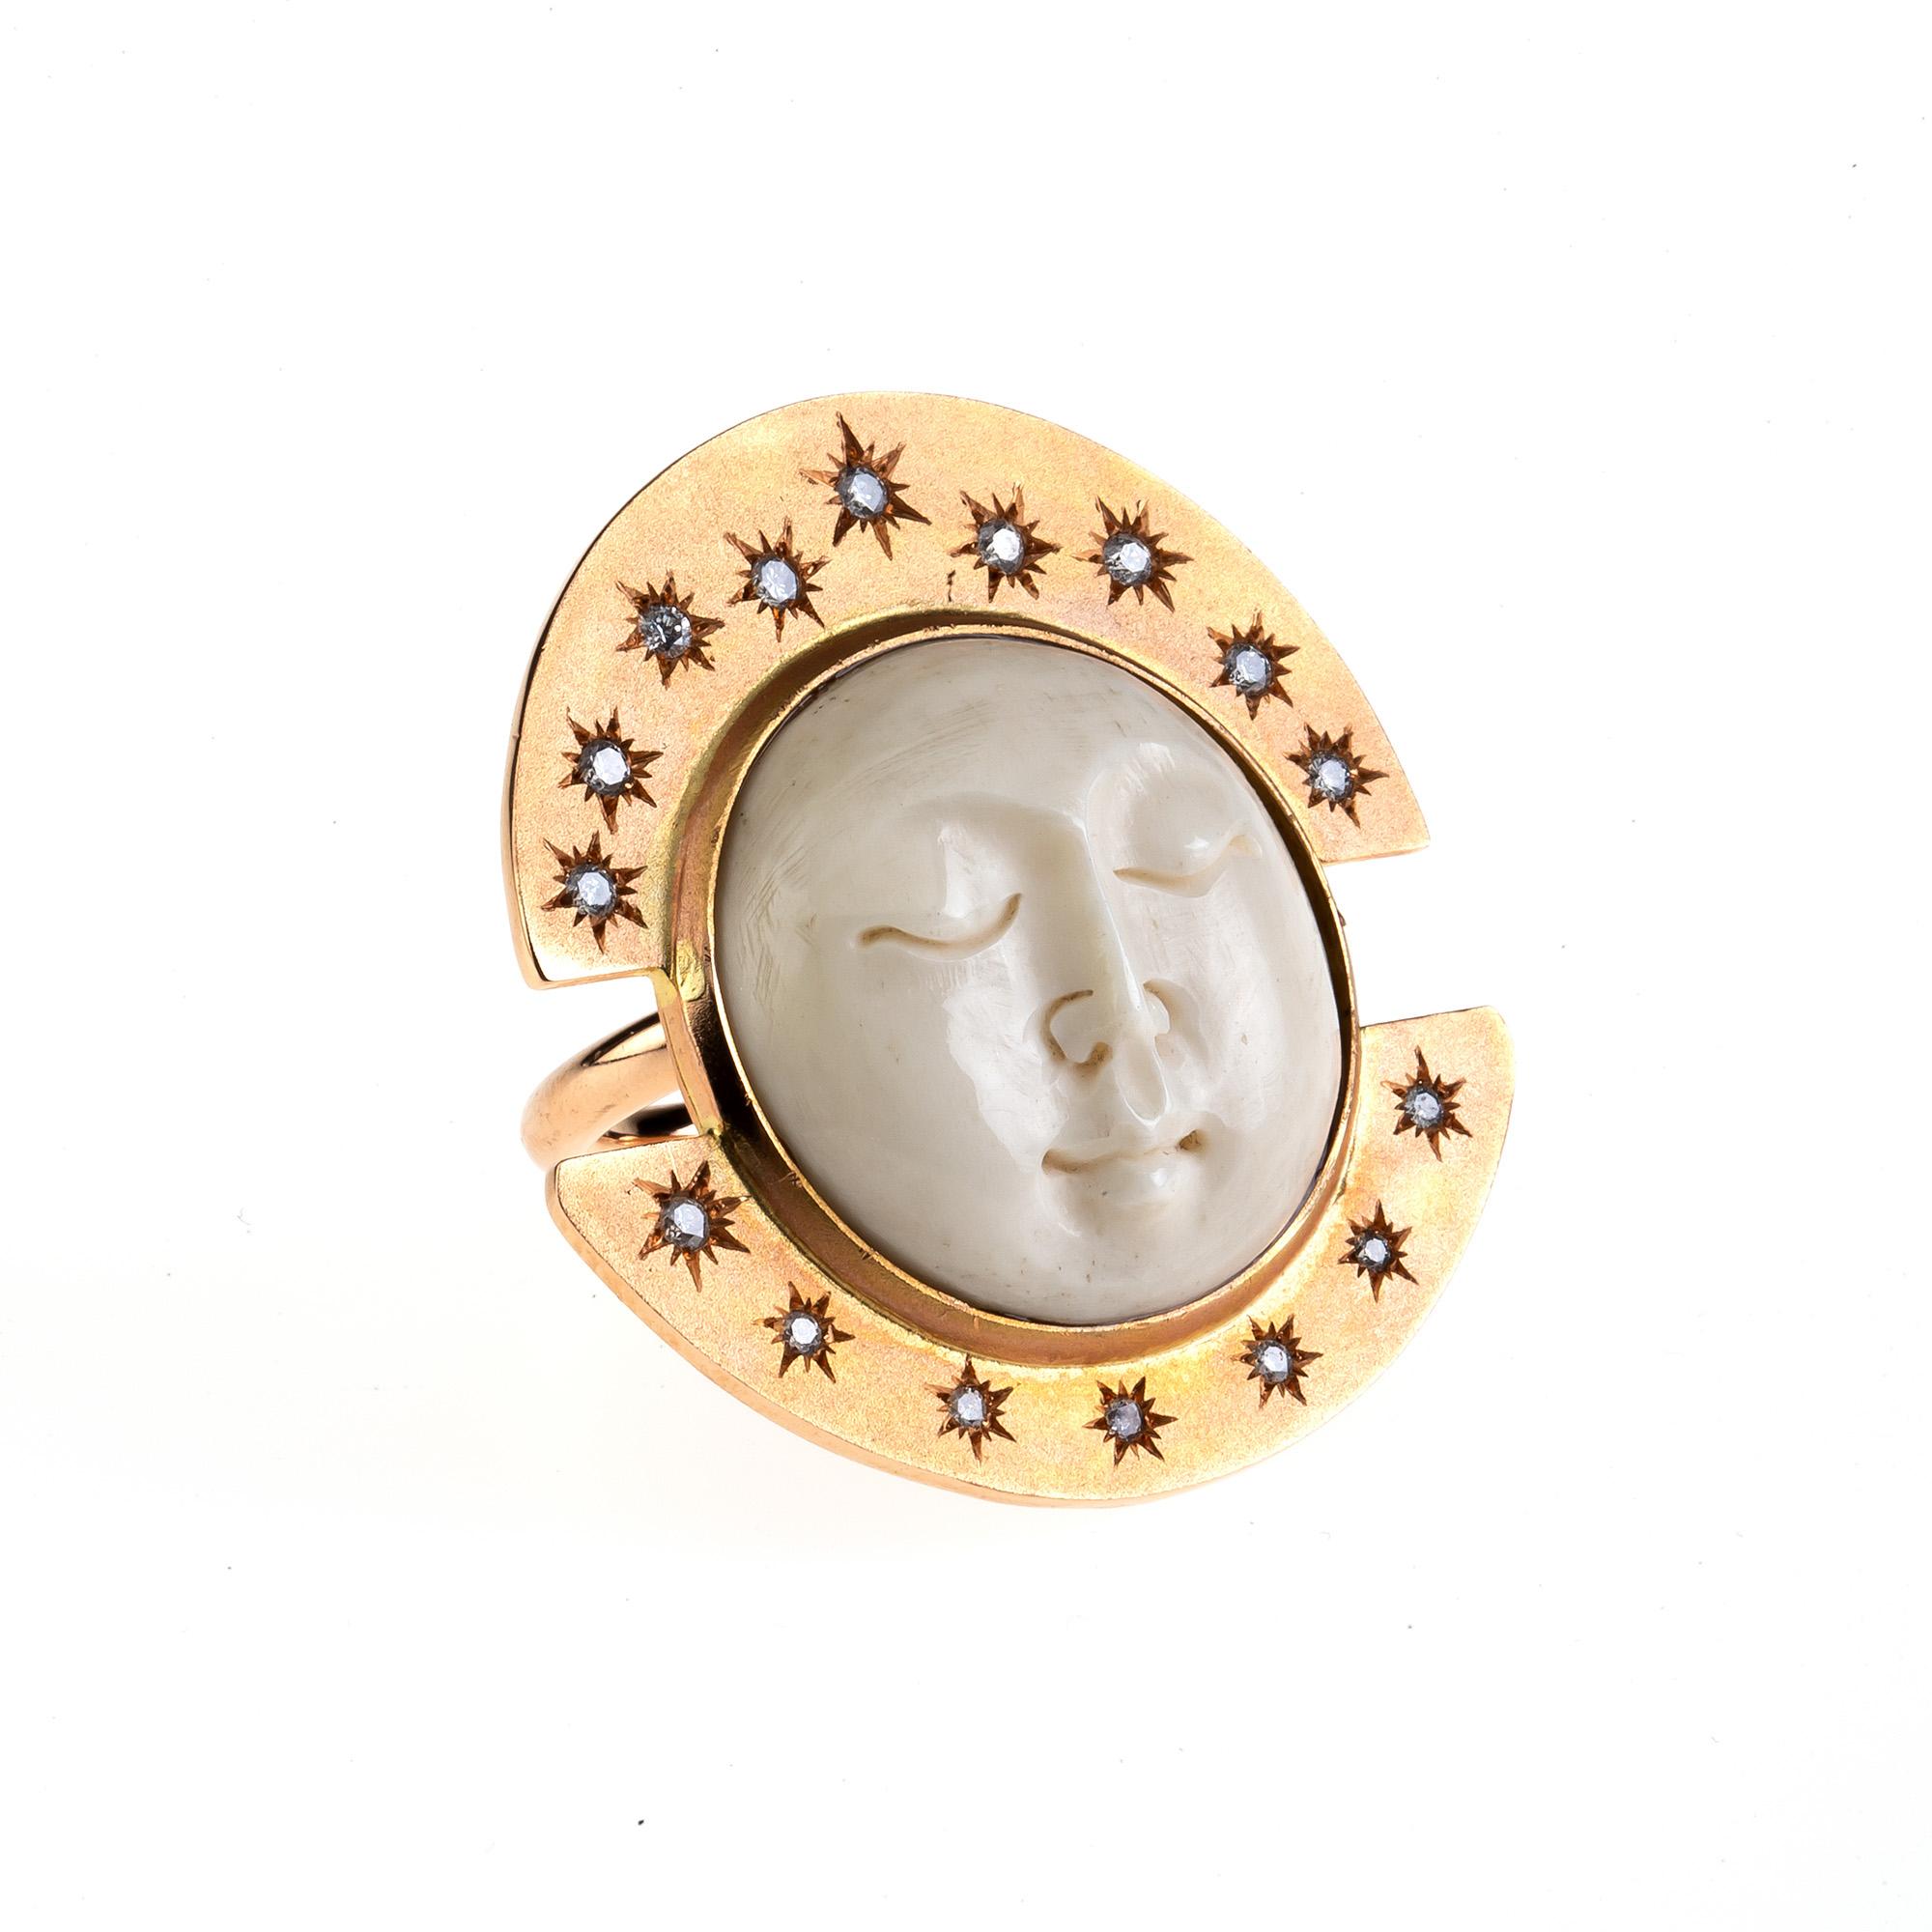 Moon stars ring 18 k rose gold gr 20,70 size 14 eu.
All Giulia Colussi jewelry is new and has never been previously owned or worn. Each item will arrive at your door beautifully gift wrapped in our boxes, put inside an elegant pouch or jewel box.
